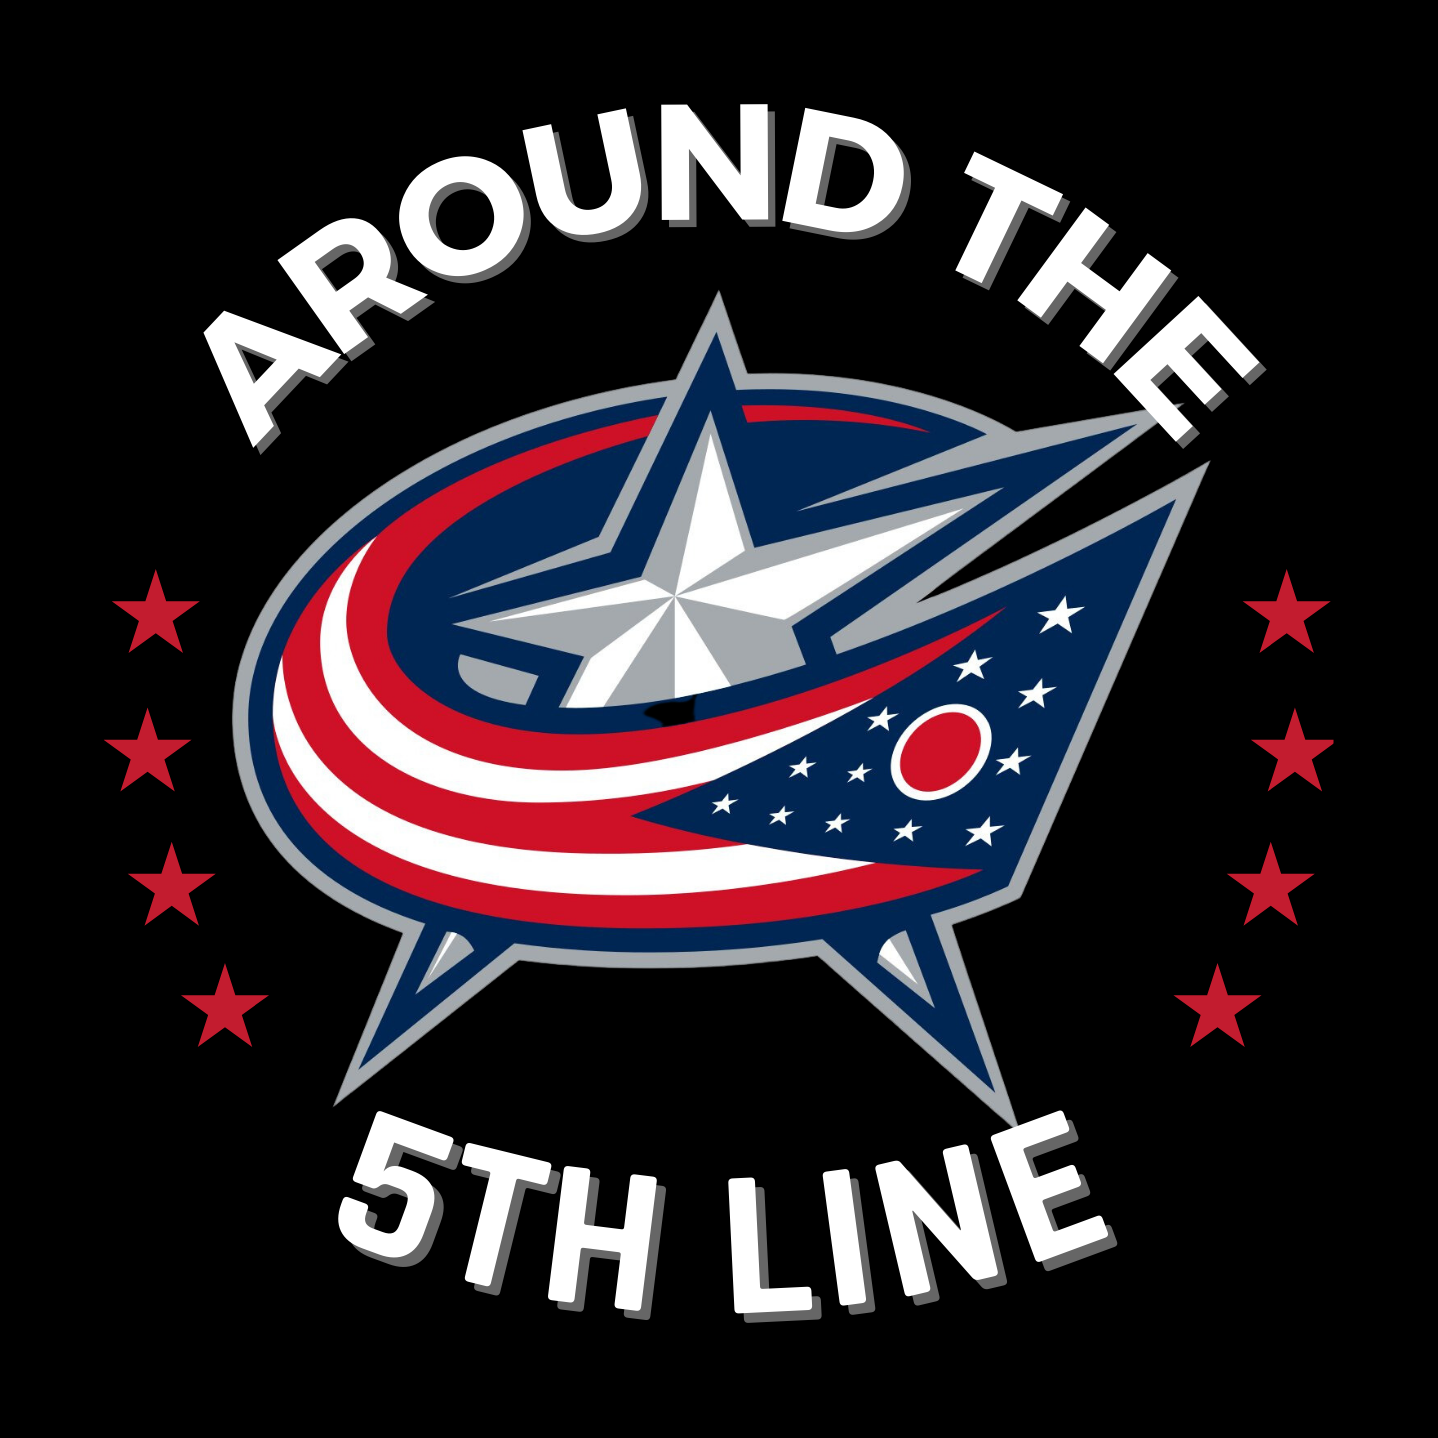 Artwork for Around The 5th Line